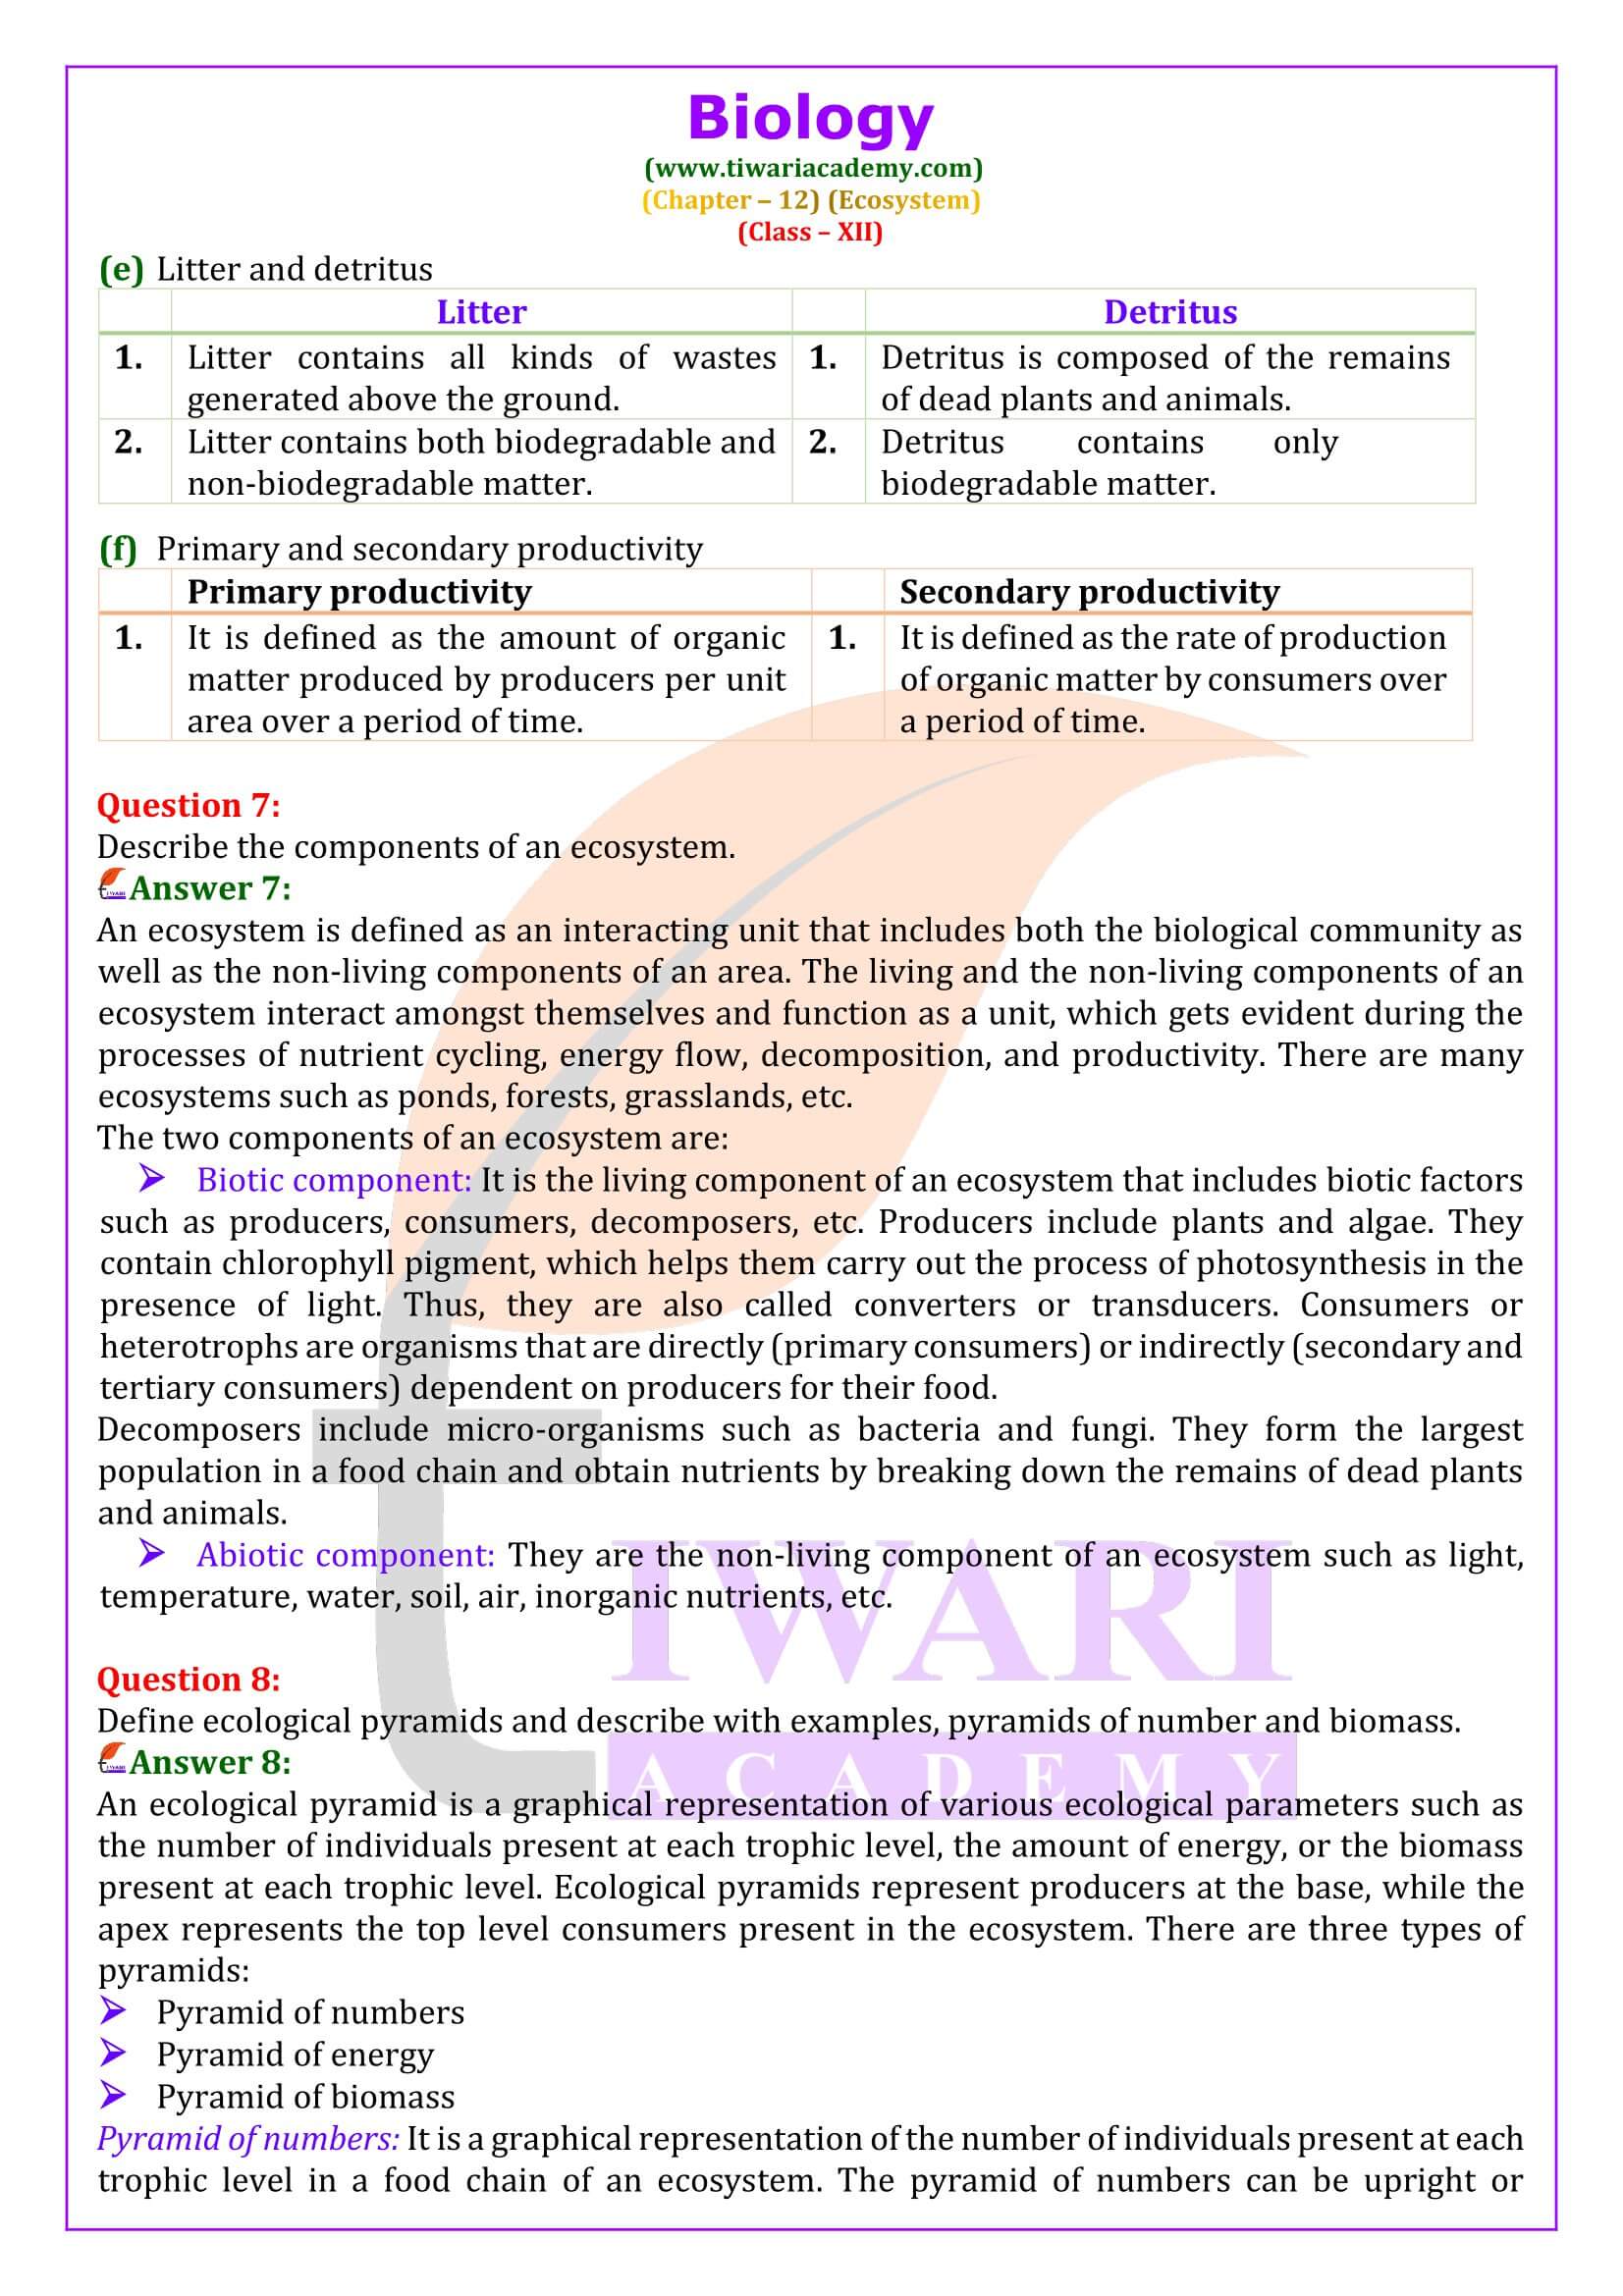 NCERT Solutions for Class 12 Biology Chapter 12 in English Medium